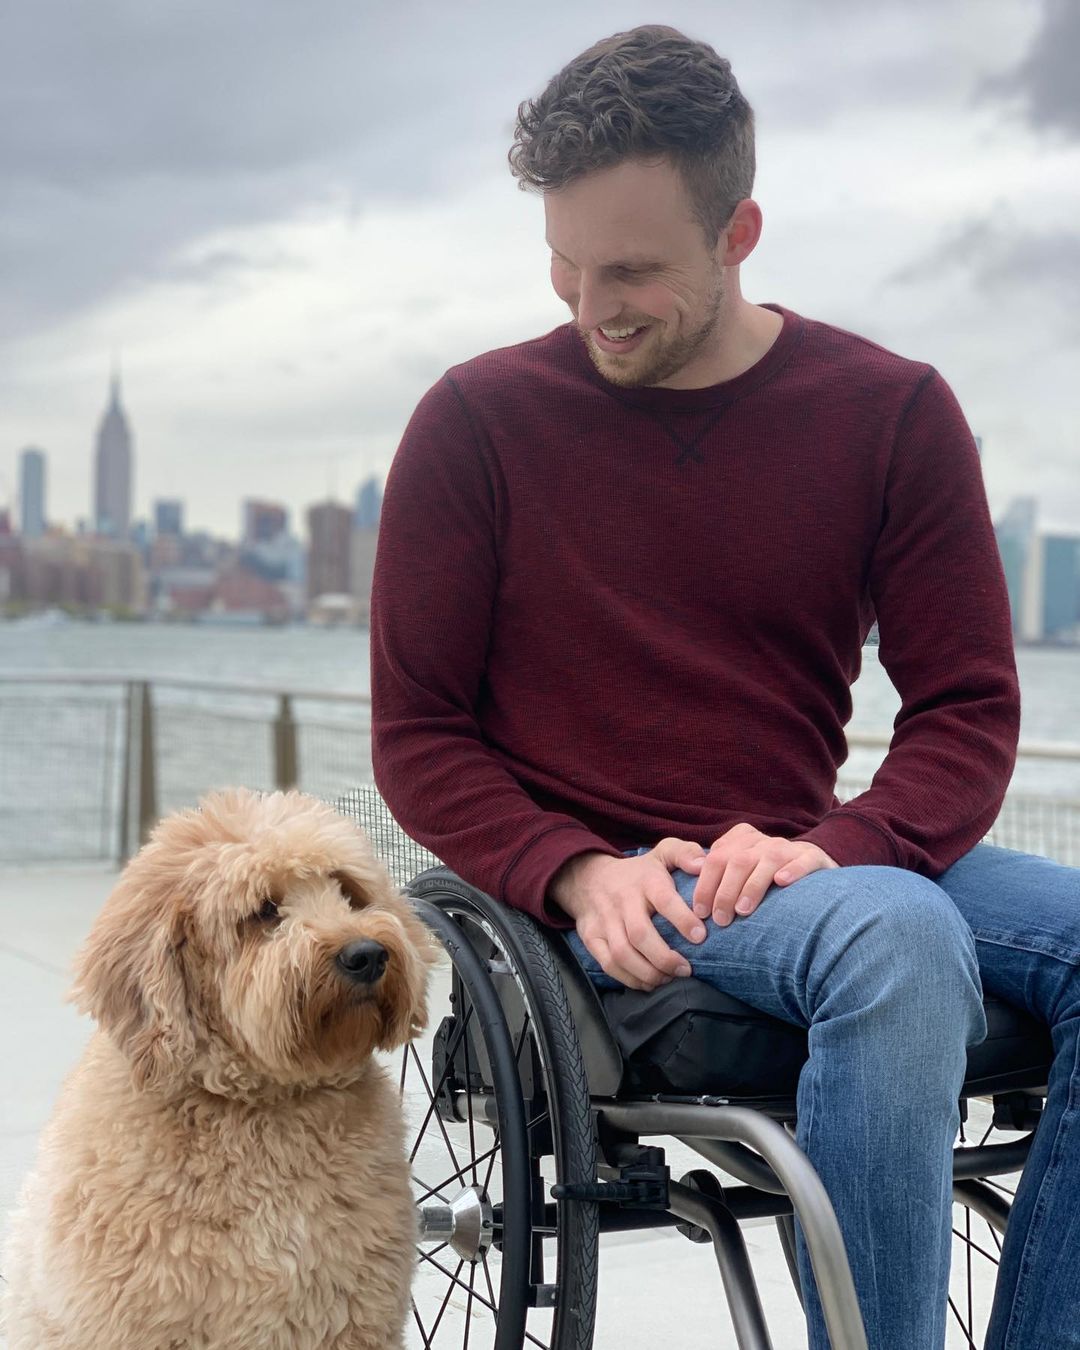 Carson is sitting in his wheelchair by the East River looking down at his dog, Lulu. New York City, including the Empire State building, is vaguely visible in the background. He is wearing a red sweater and light blue jeans. Carson is a white man with light brown hair.